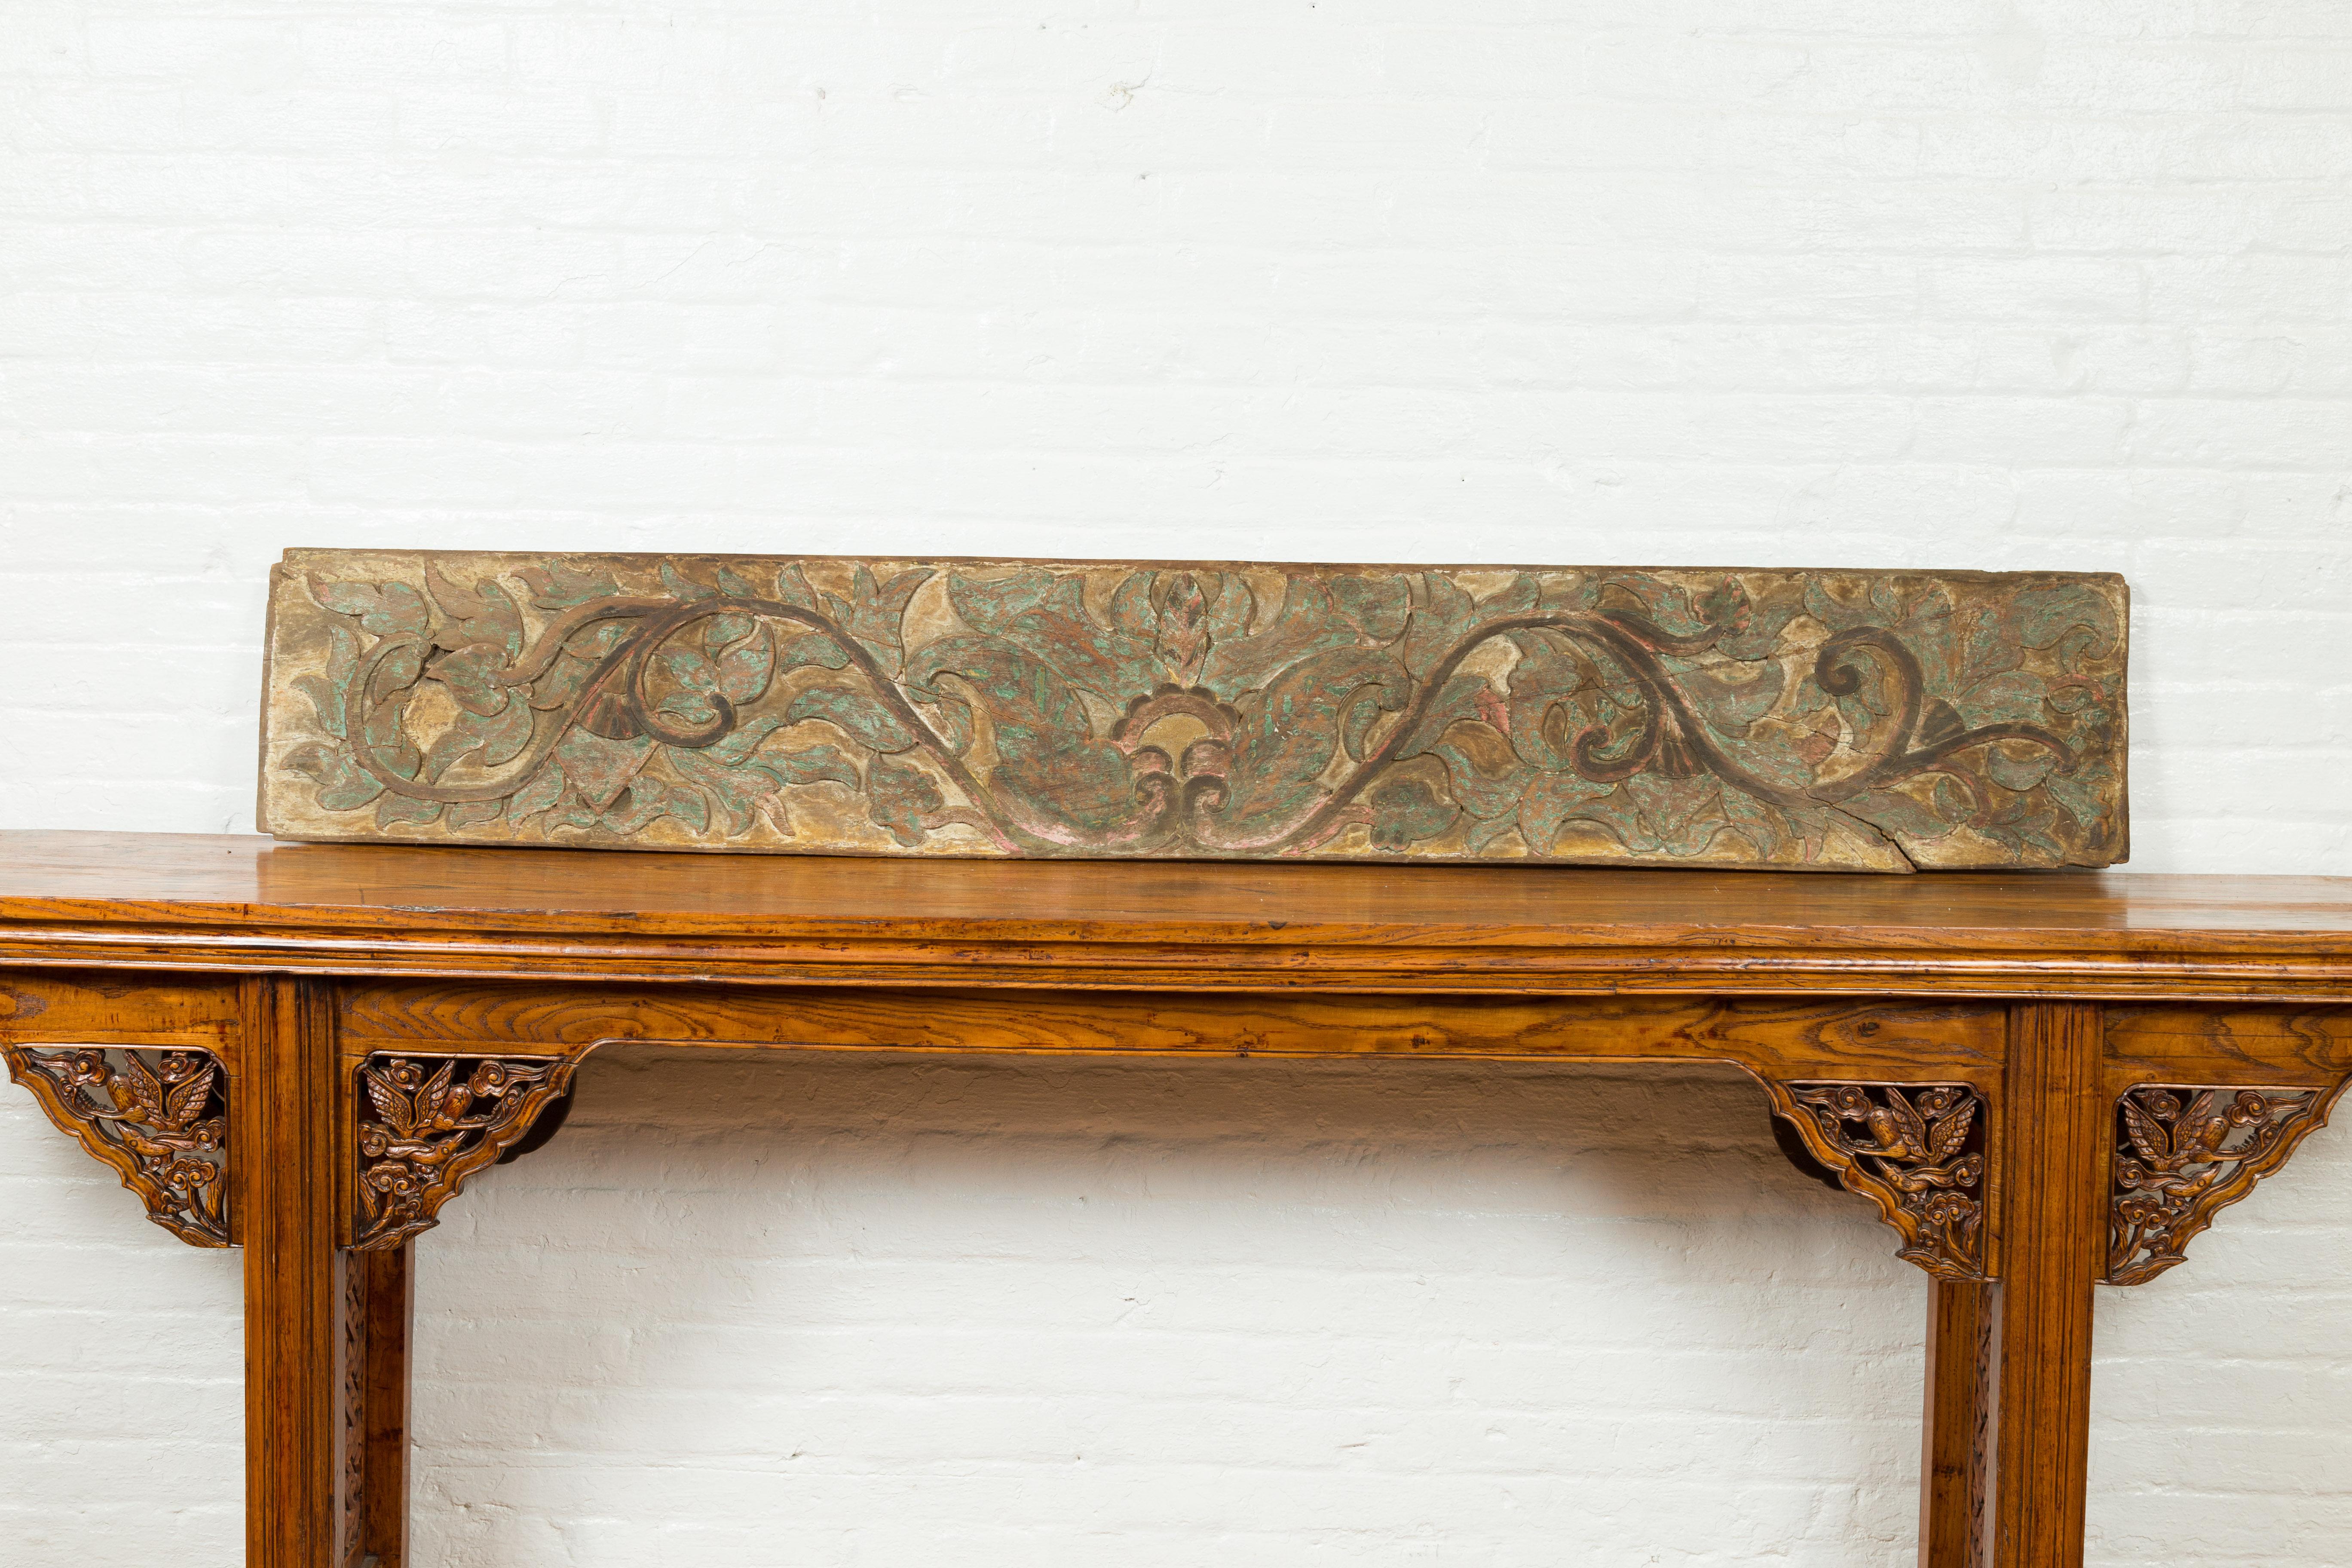 19th Century Antique Indonesian Painted and Carved Wood Door Panel with Scrolls and Foliage For Sale